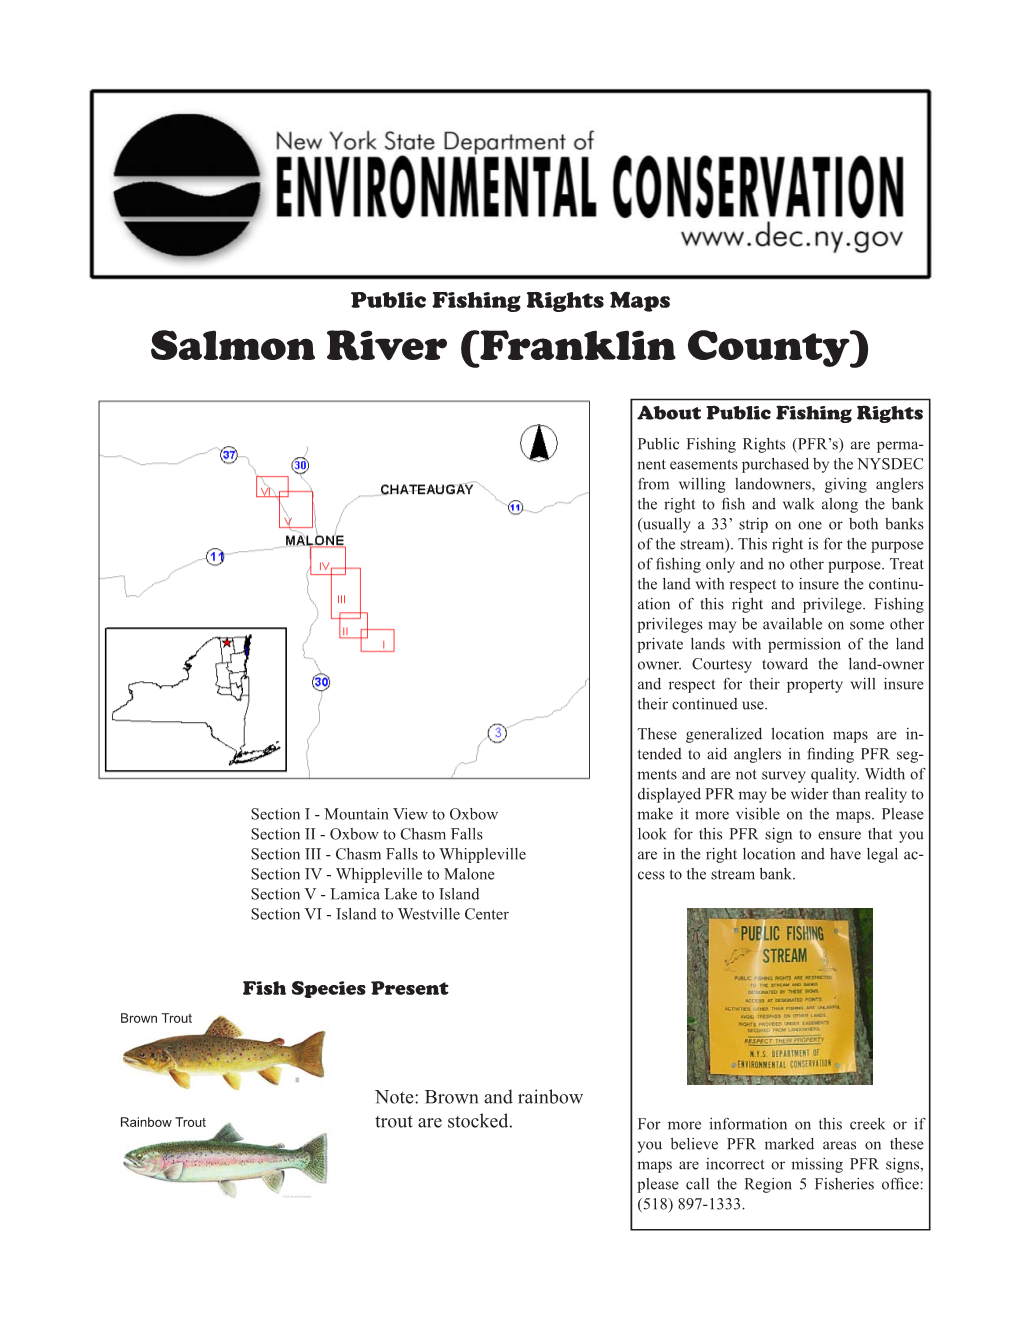 Public Fishing Rights Maps: Salmon River, Franklin County